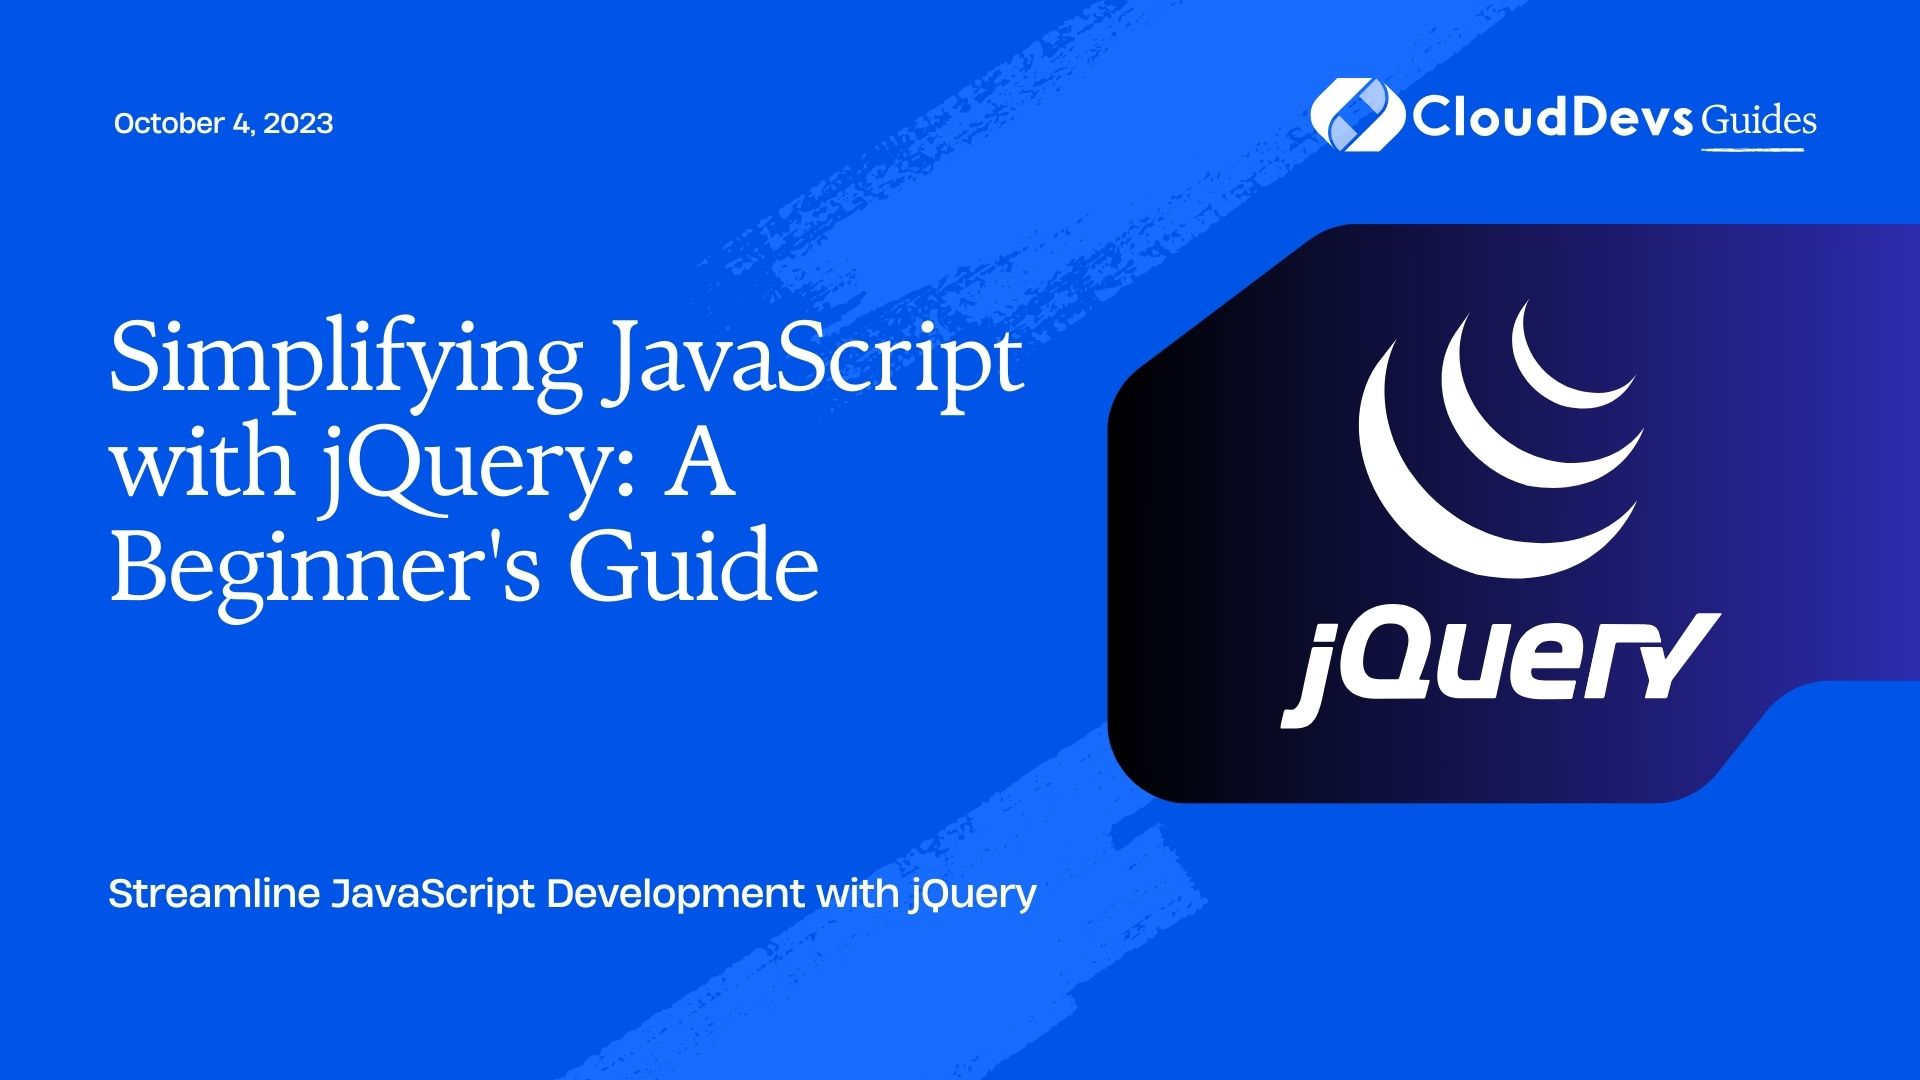 Simplifying JavaScript with jQuery: A Beginner's Guide